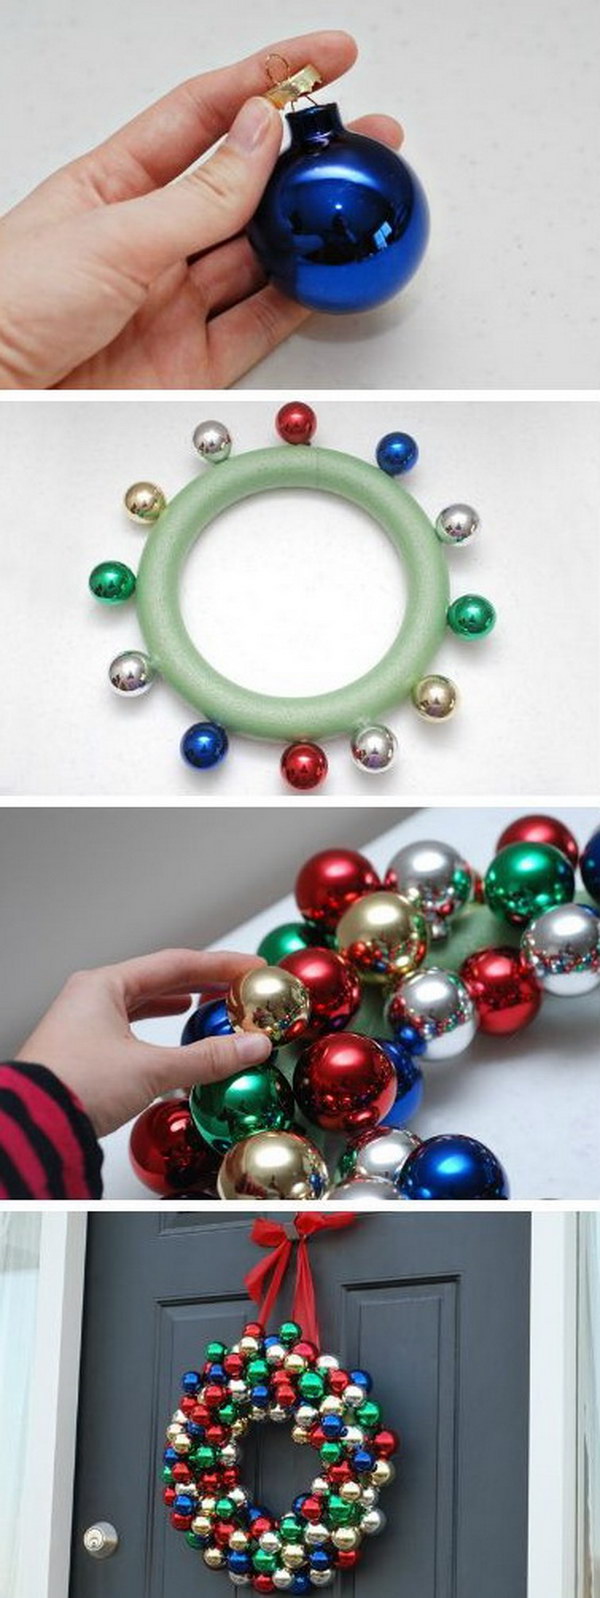 DIY Christmas Ornament Wreath. Super simple and inexpensive Christmas wreath. Look perfect on your front door!